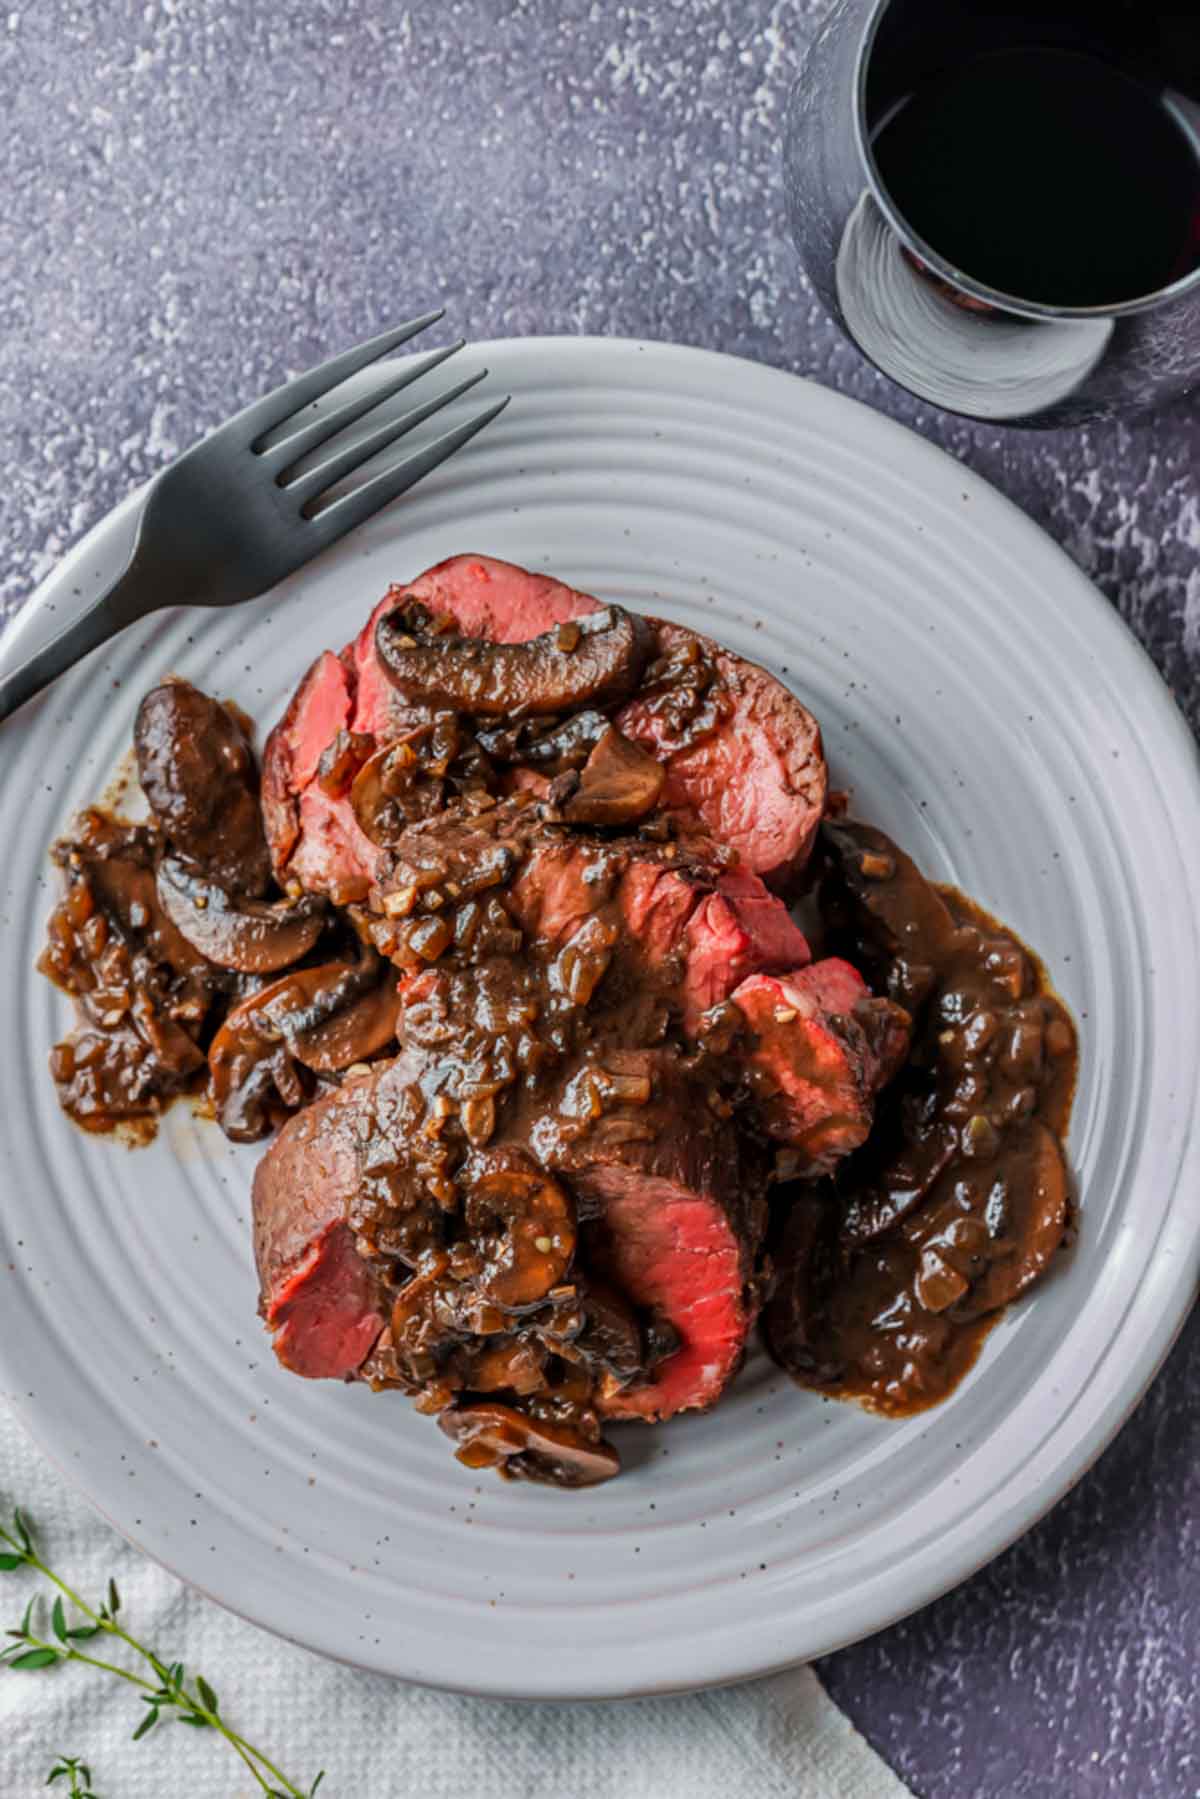 pieces of cooked red meat on a plate with a brown sauce